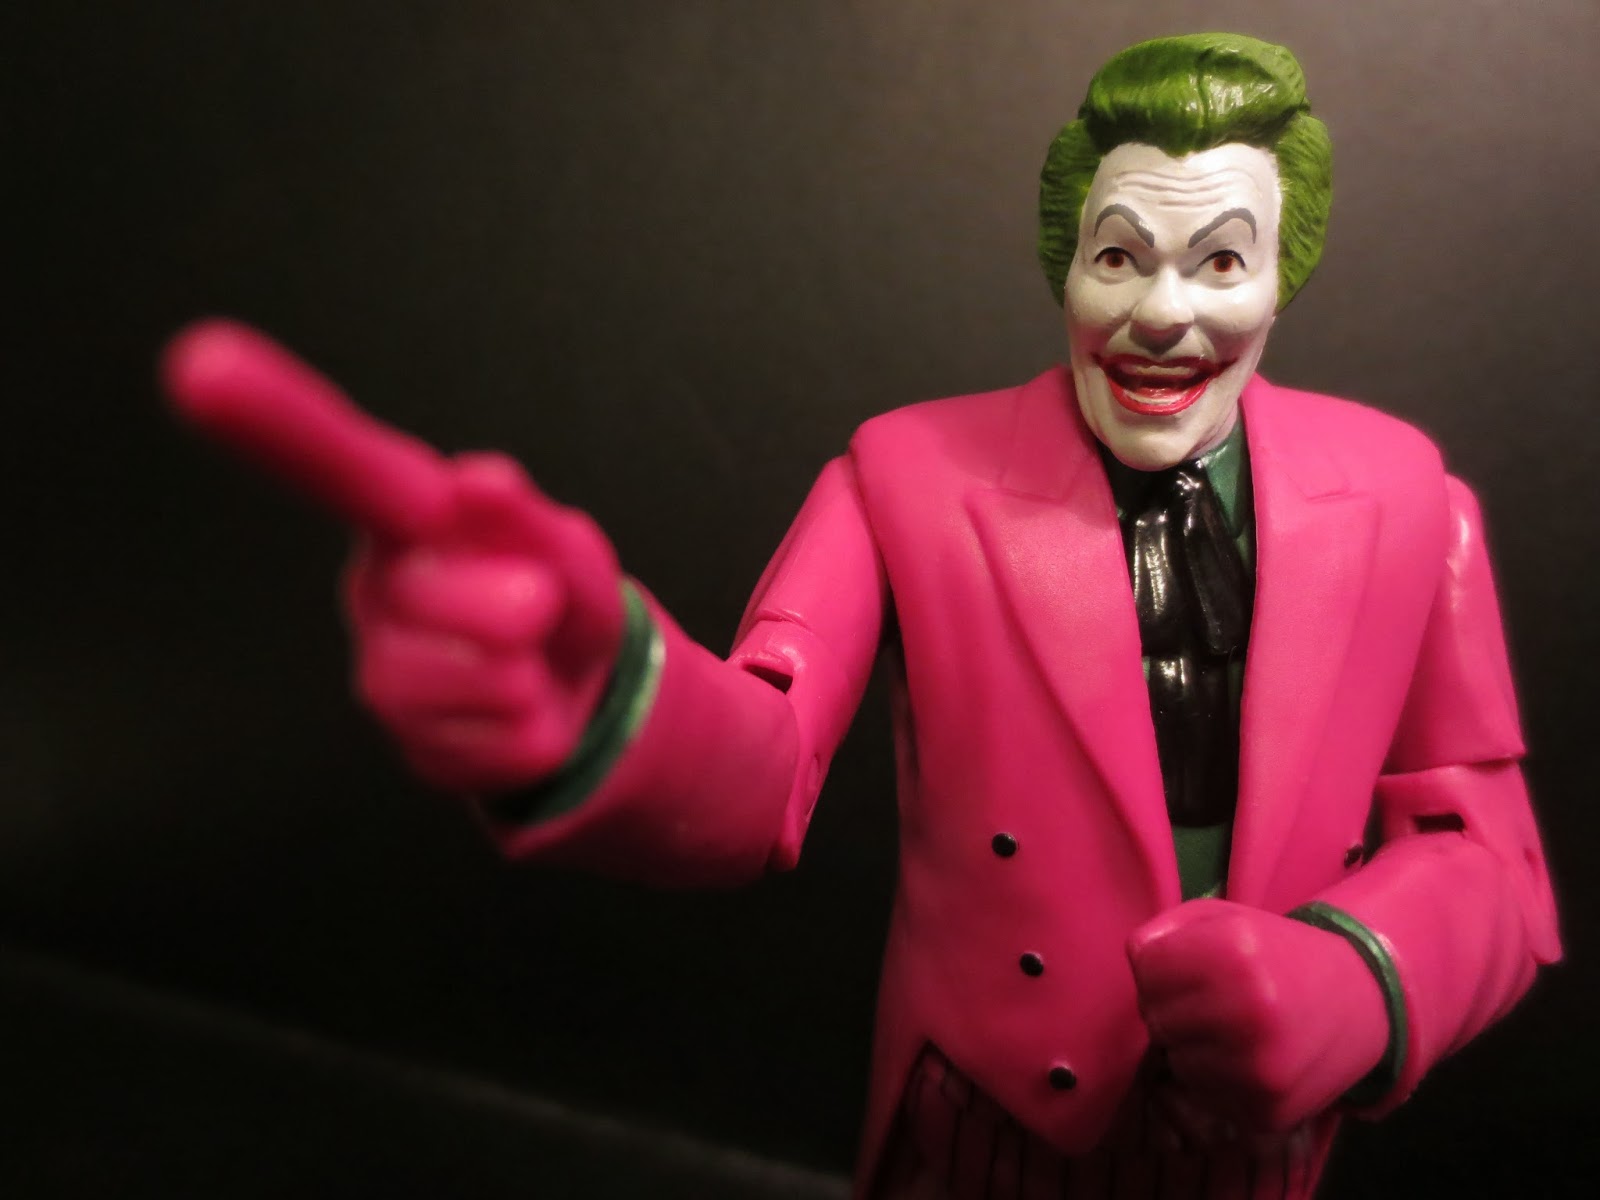 Action Figure Review: The Joker from Batman Classic TV Series by Mattel